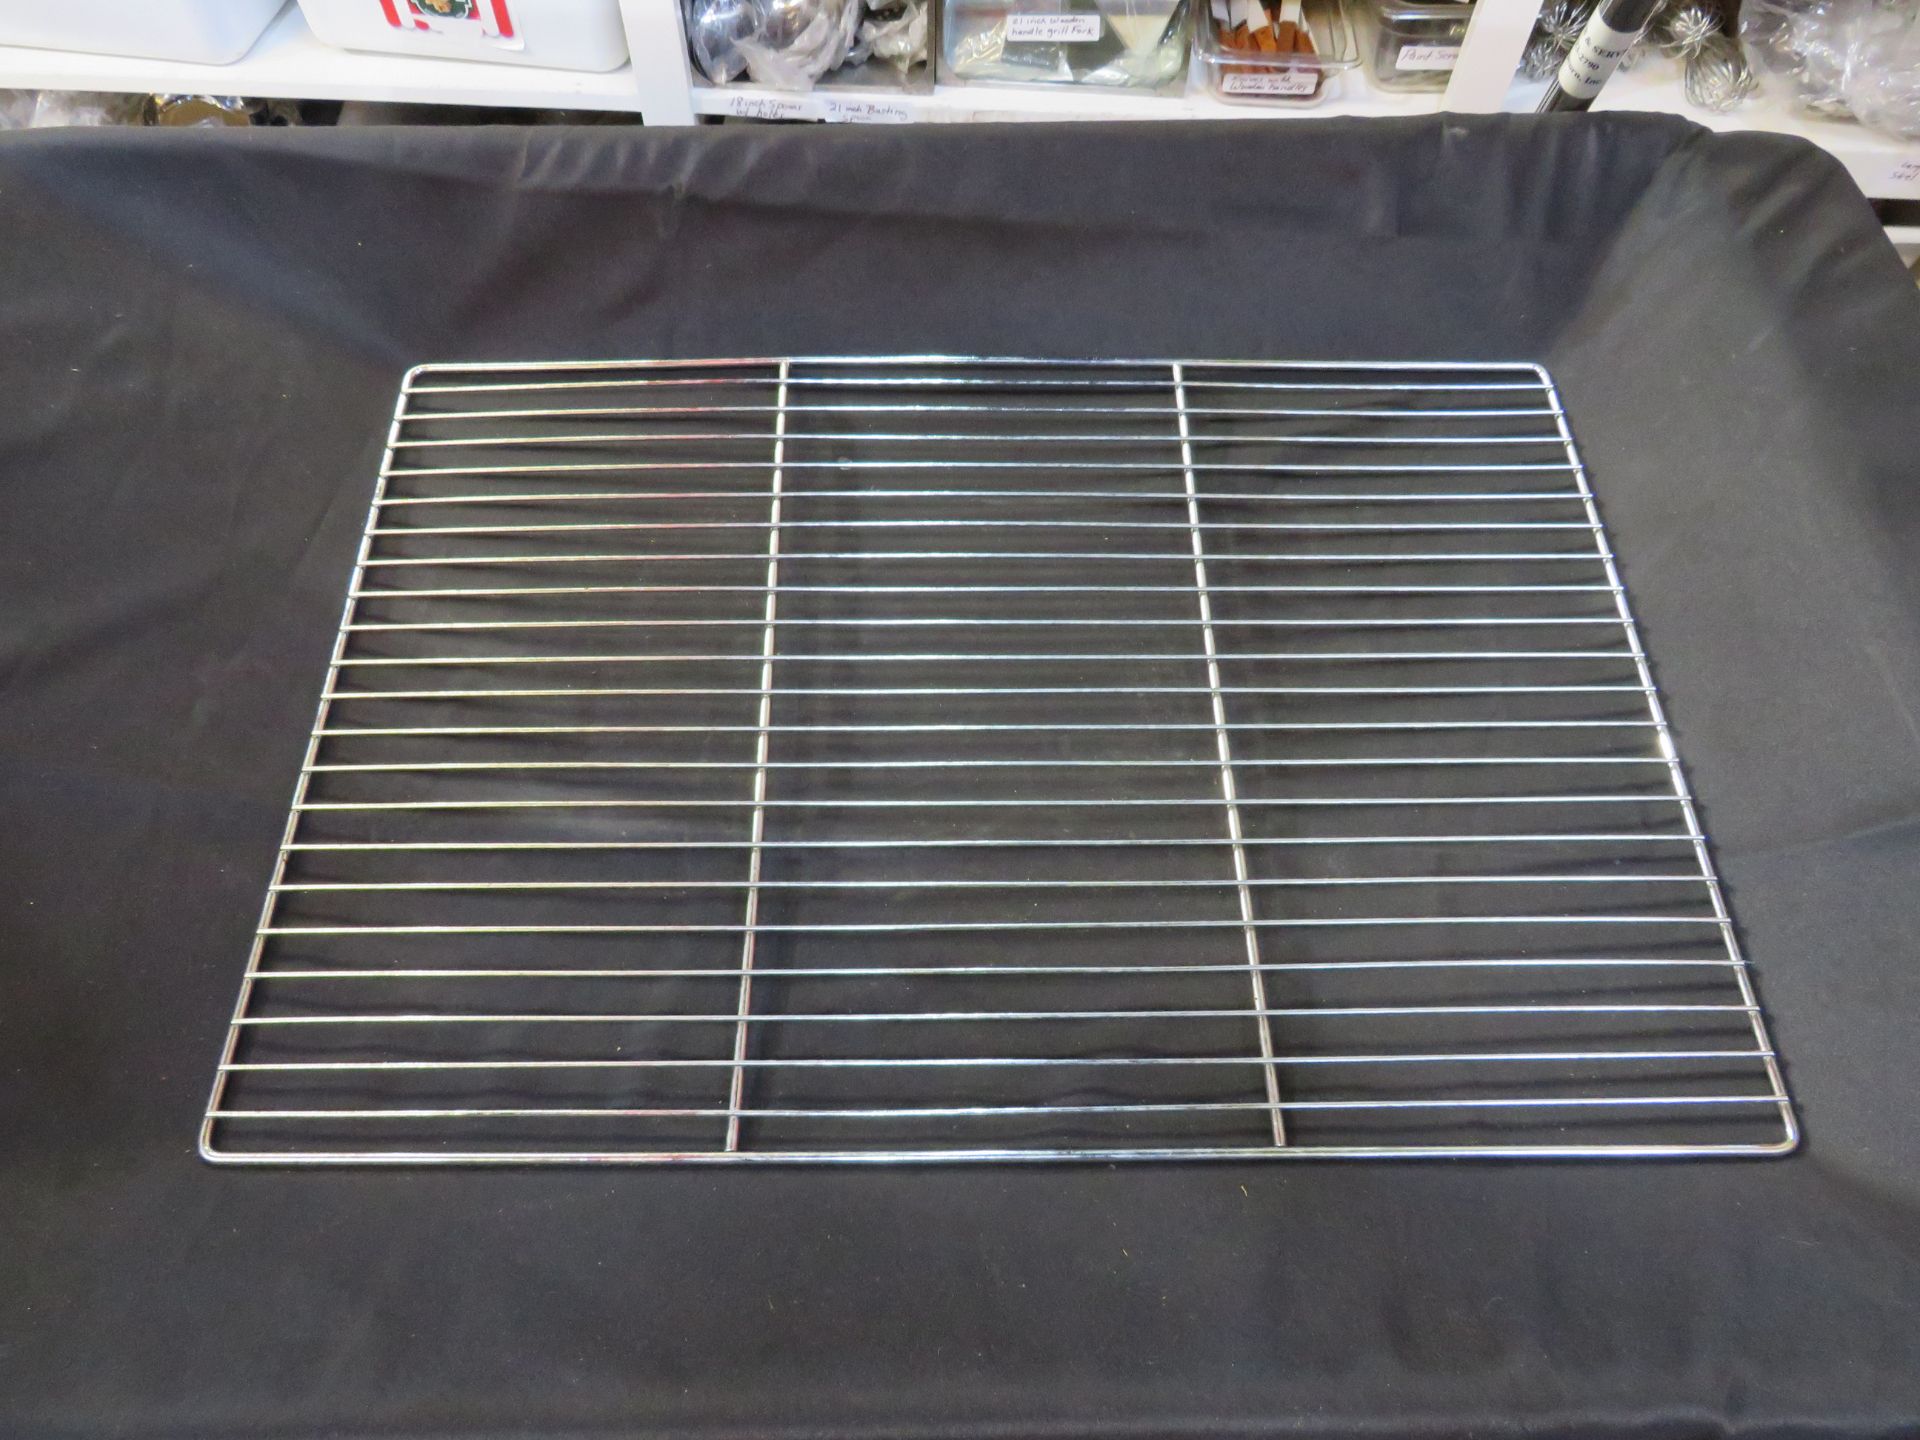 Large Oven Grate